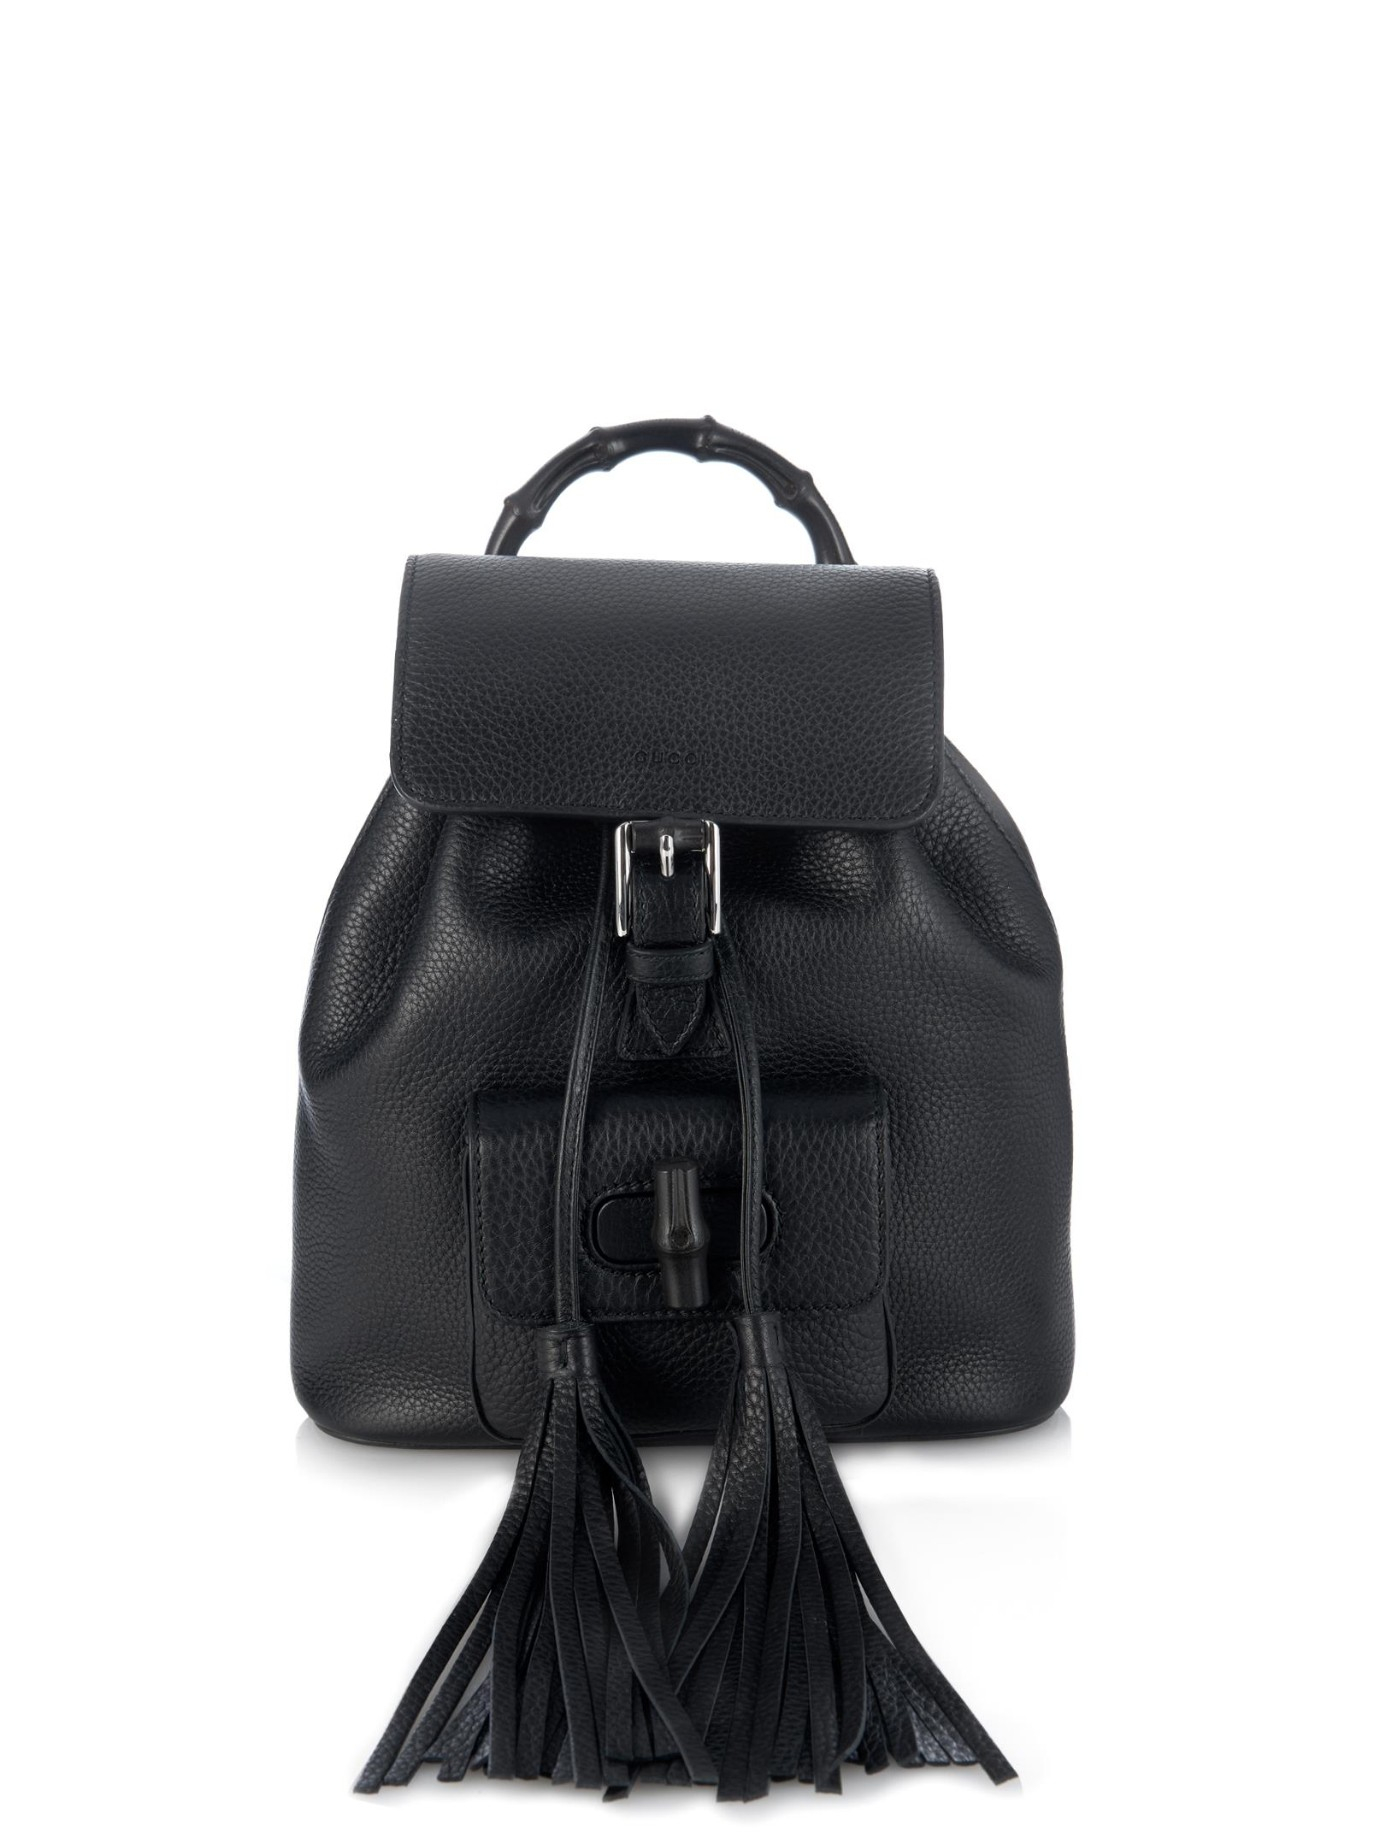 Lyst - Gucci Bamboo Mini Leather Backpack in Black